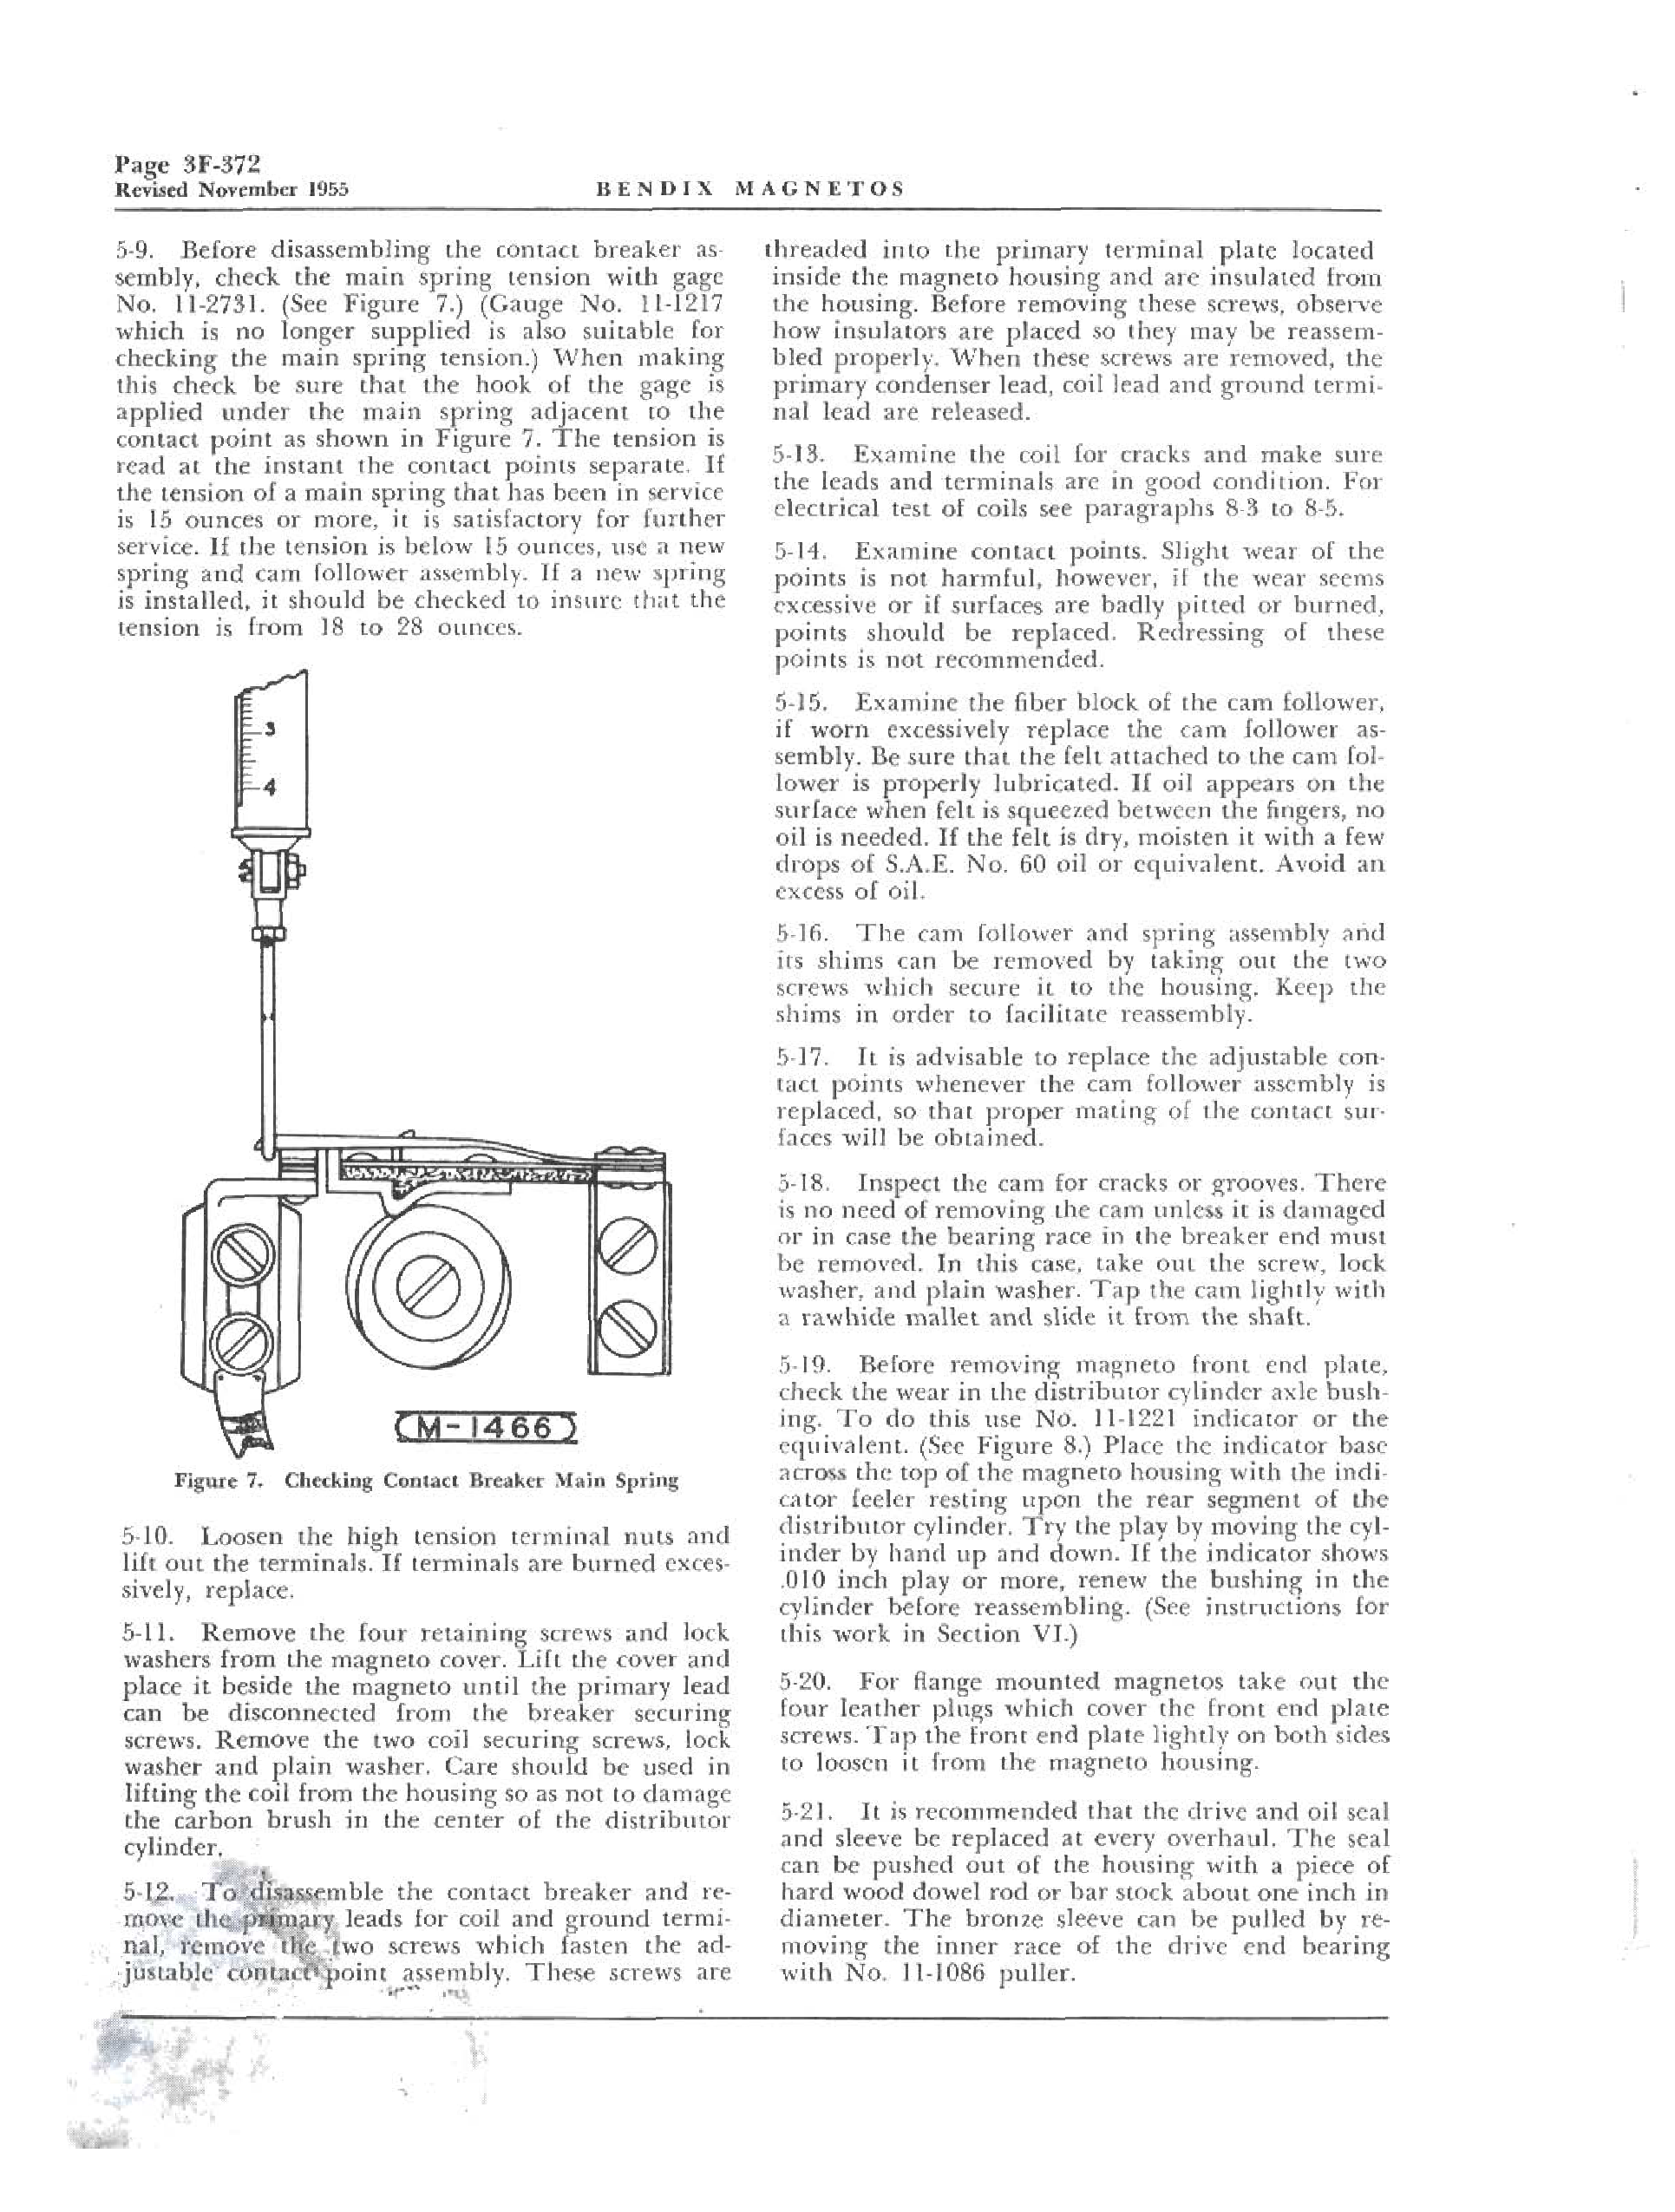 Sample page 6 from AirCorps Library document: Service Instructions for Bendix Aircraft Magnetos